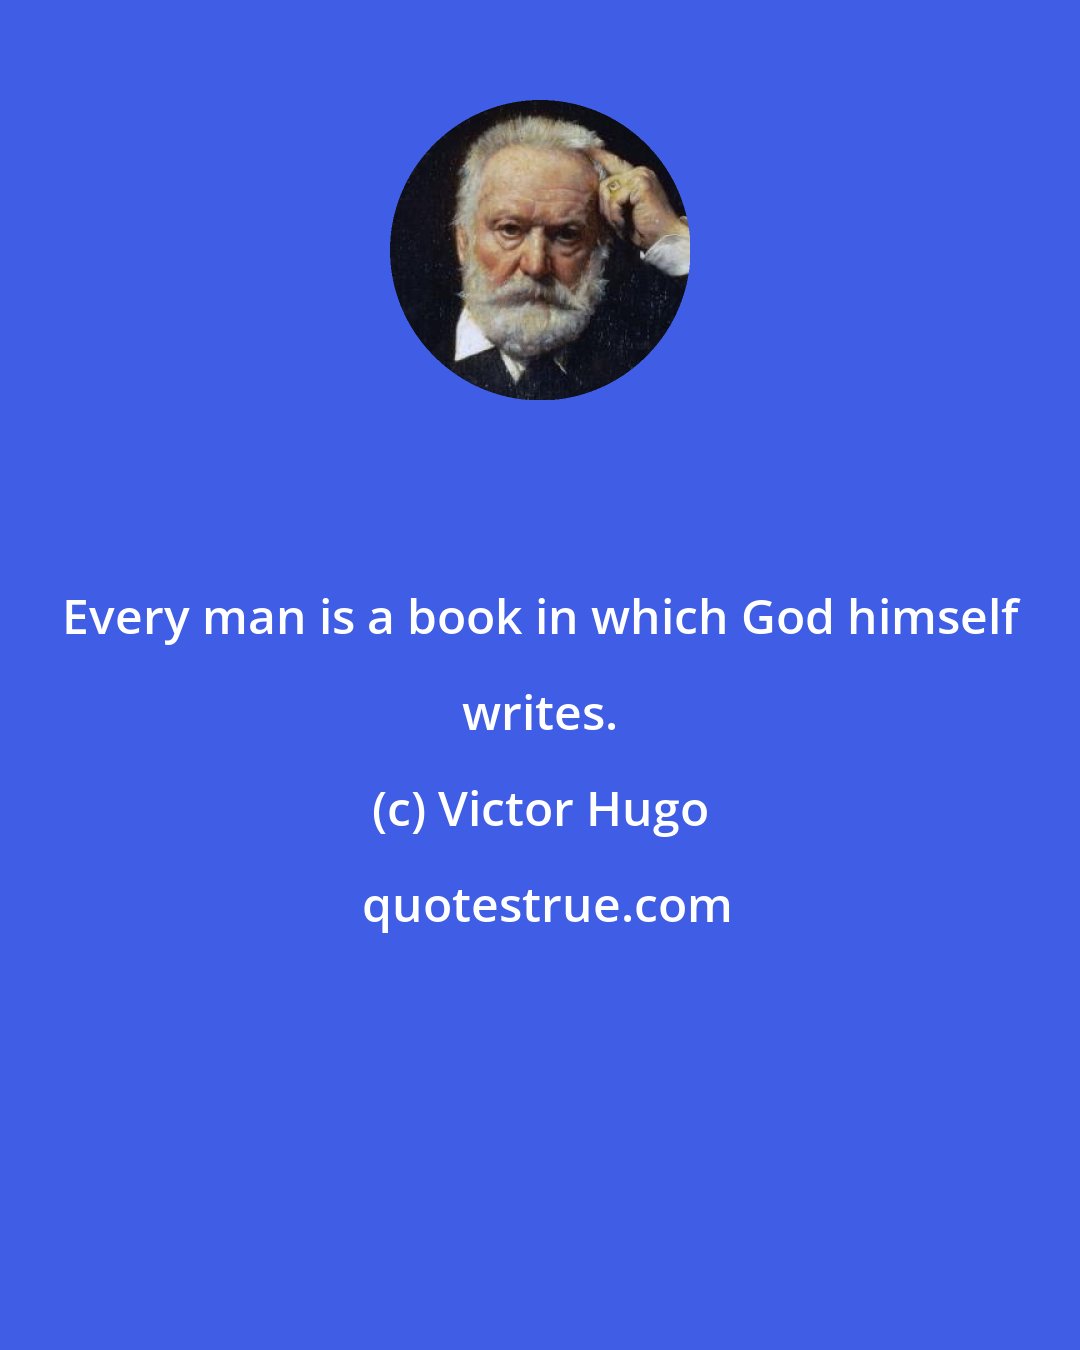 Victor Hugo: Every man is a book in which God himself writes.